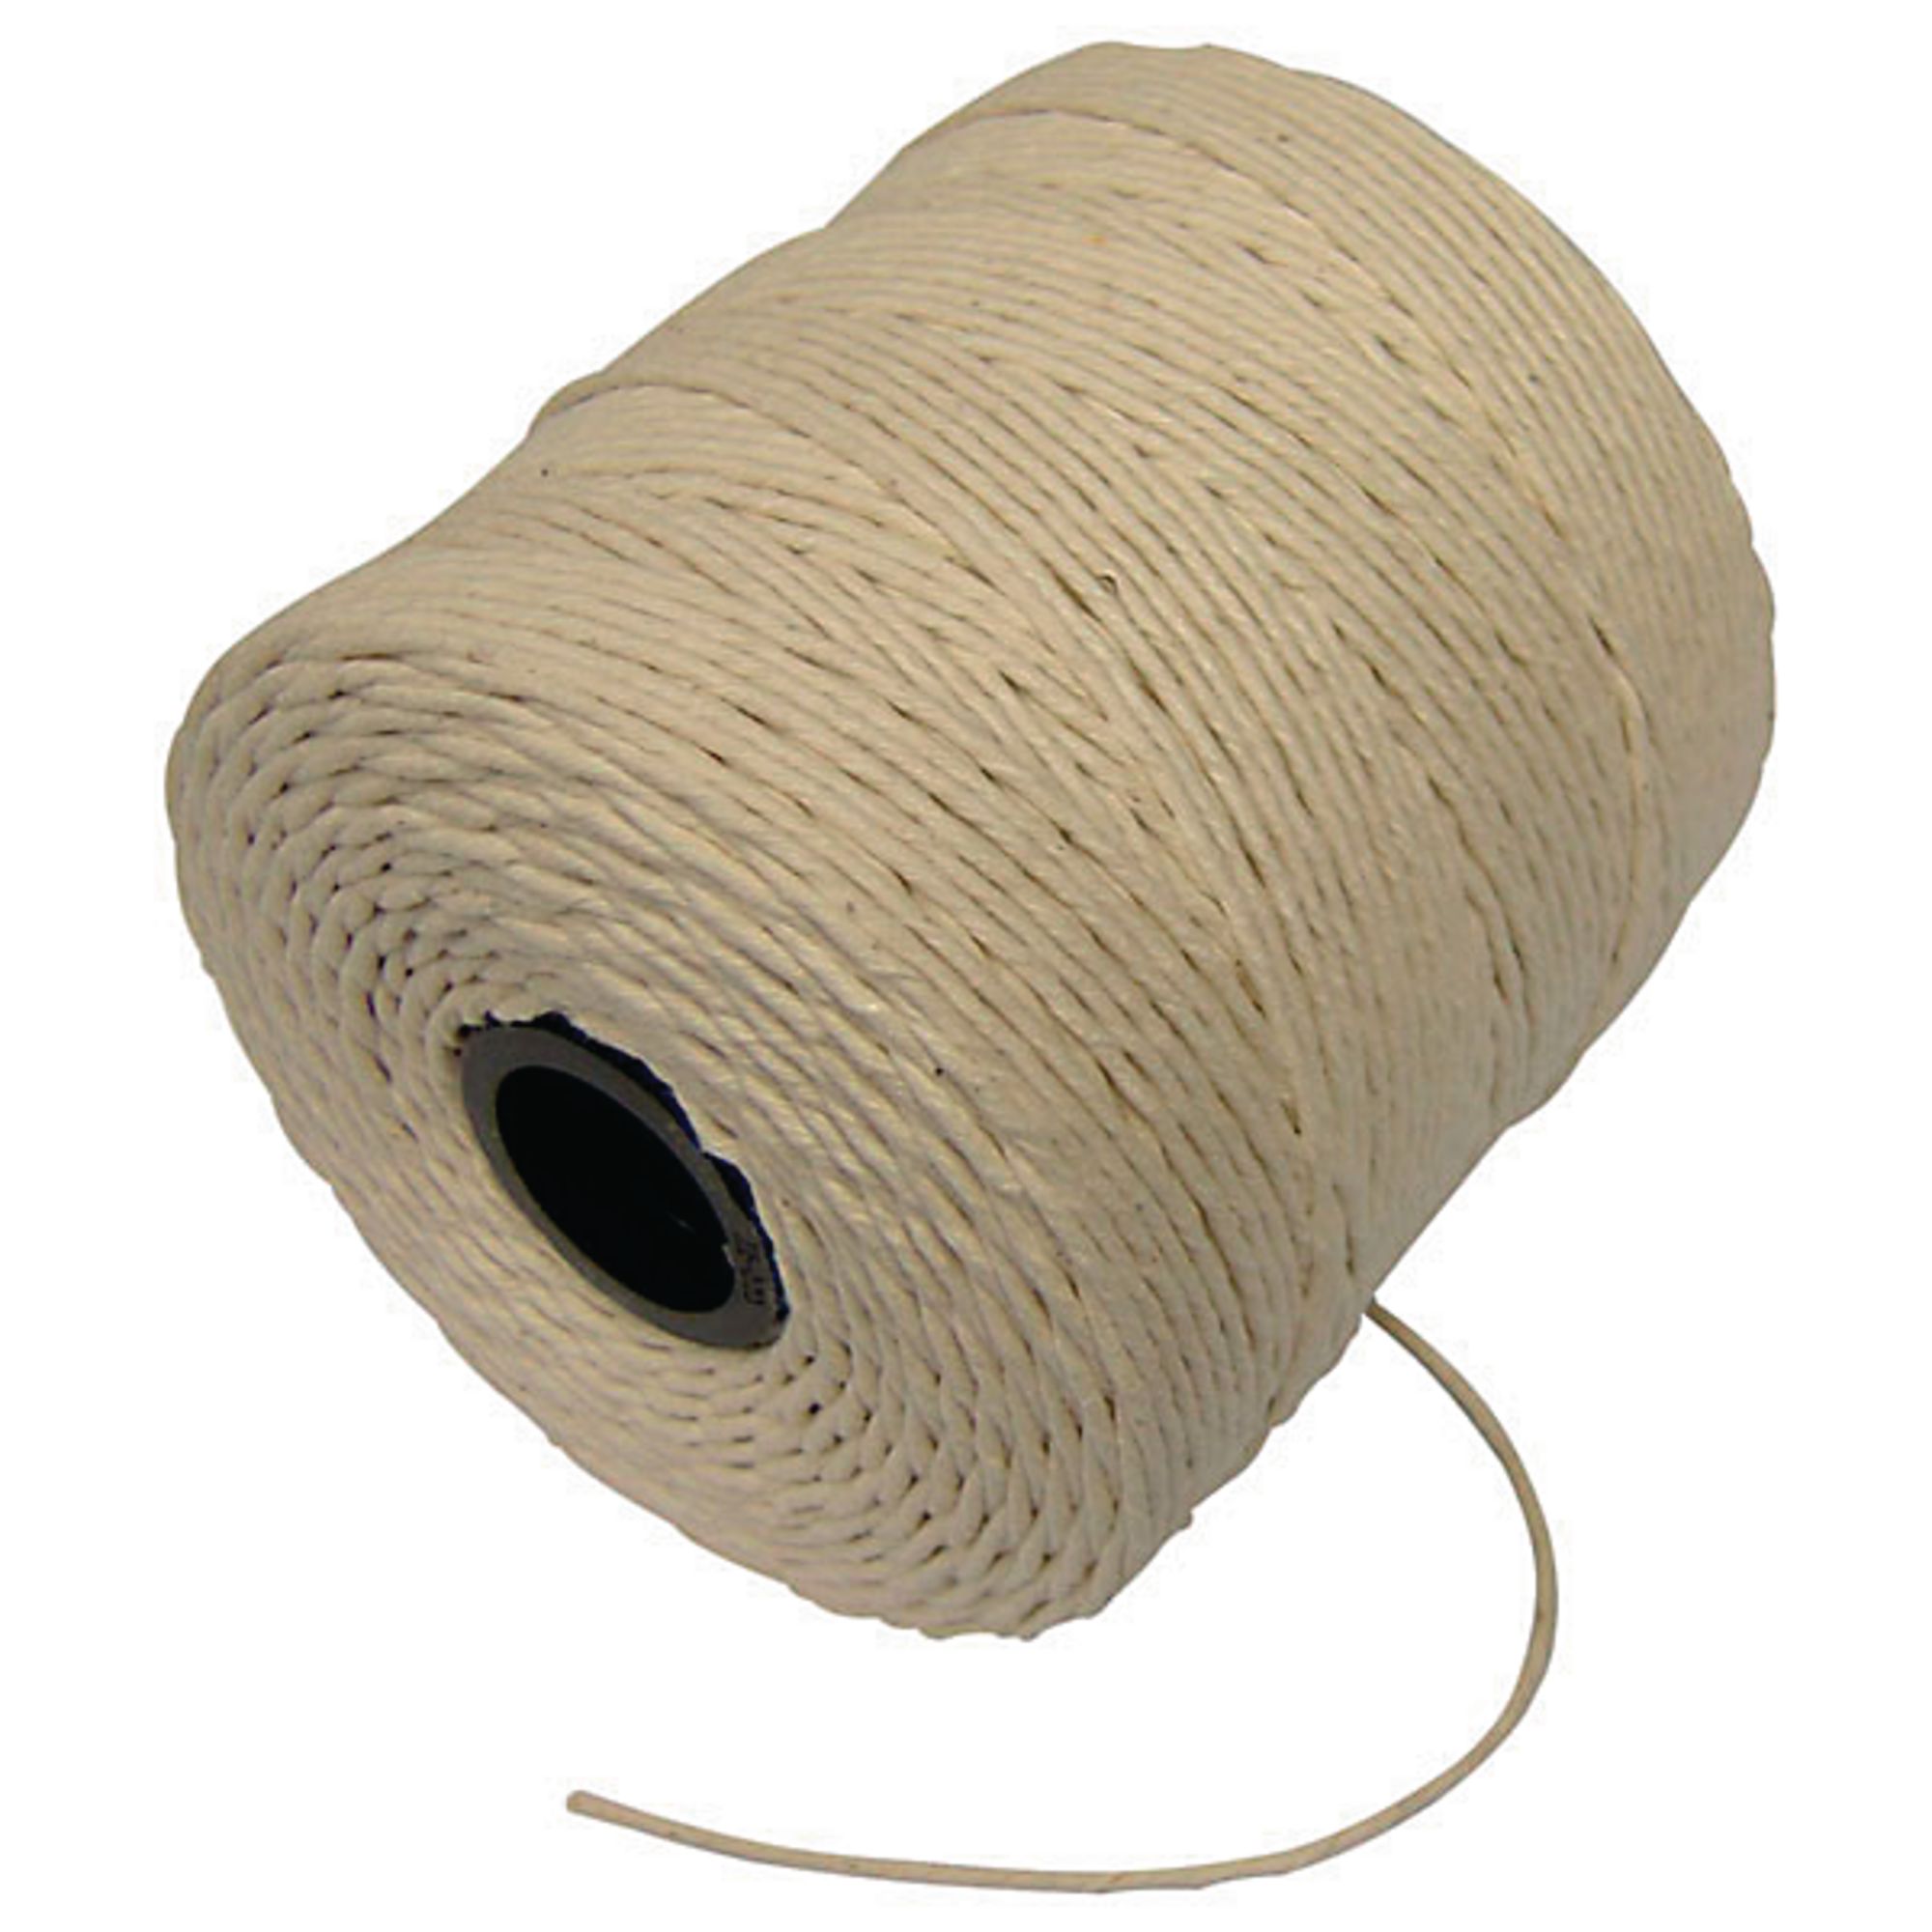 E8R06595 - Cotton String - 500g Unpolished - Pack of 1